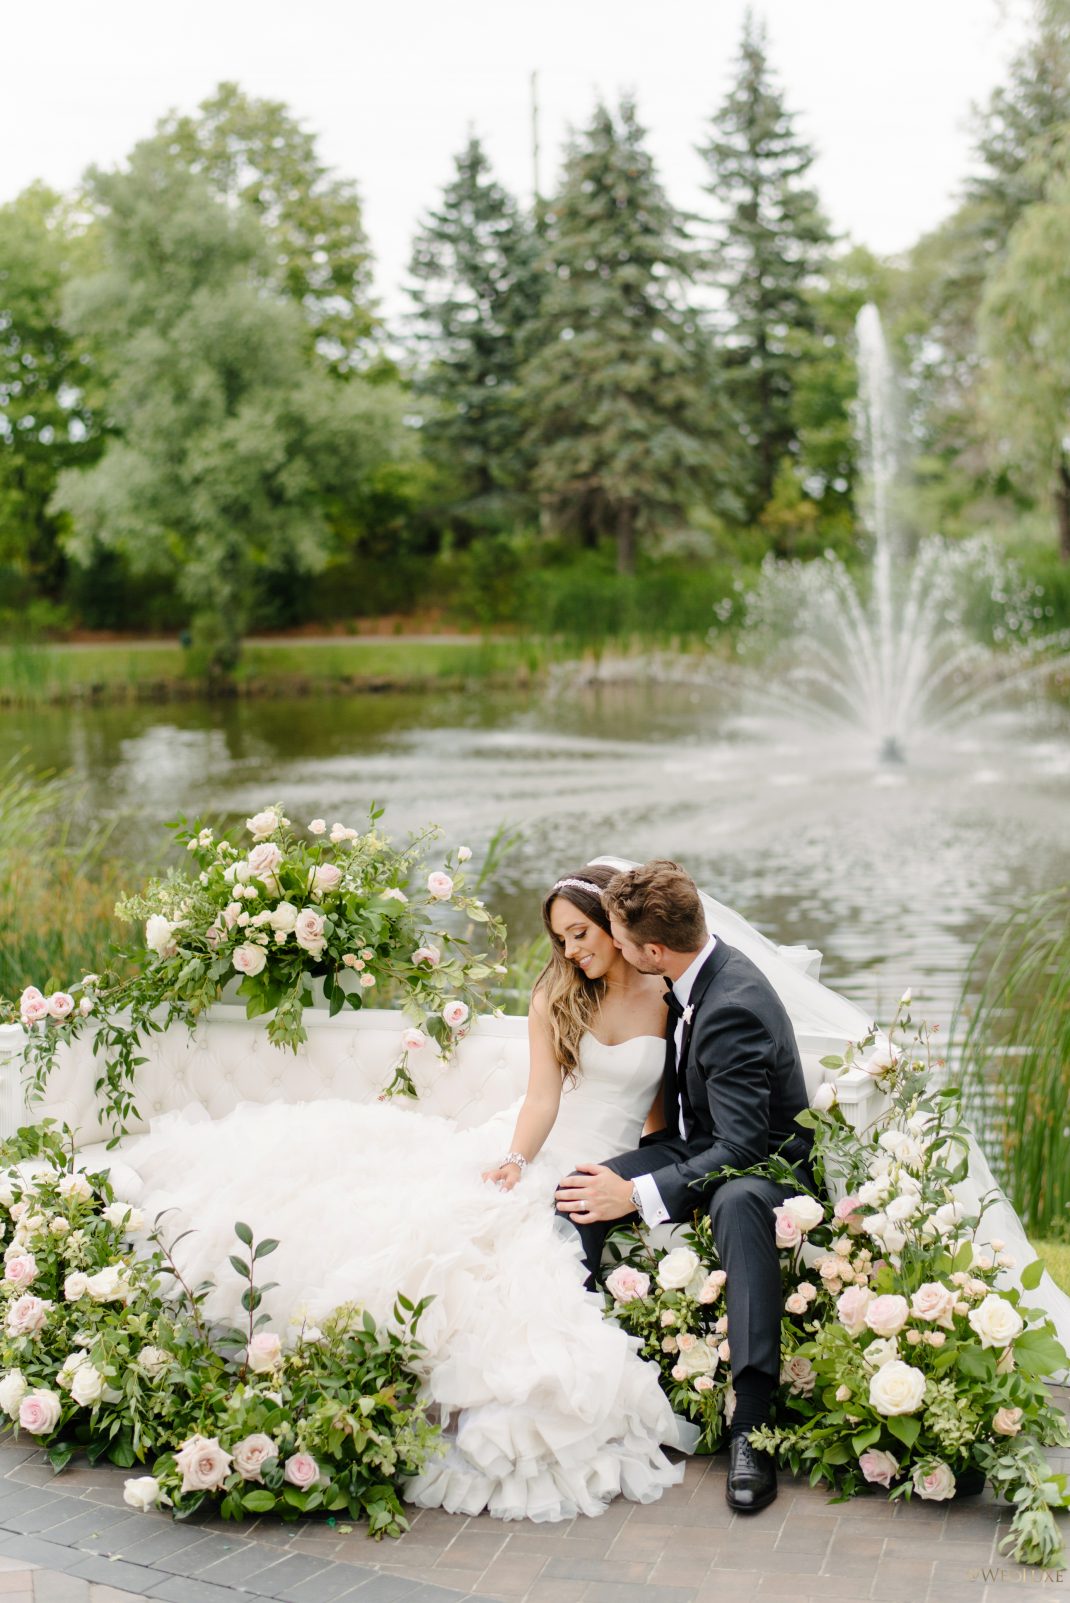 Newlyweds photoshoot by the pond at the Arlington Estate